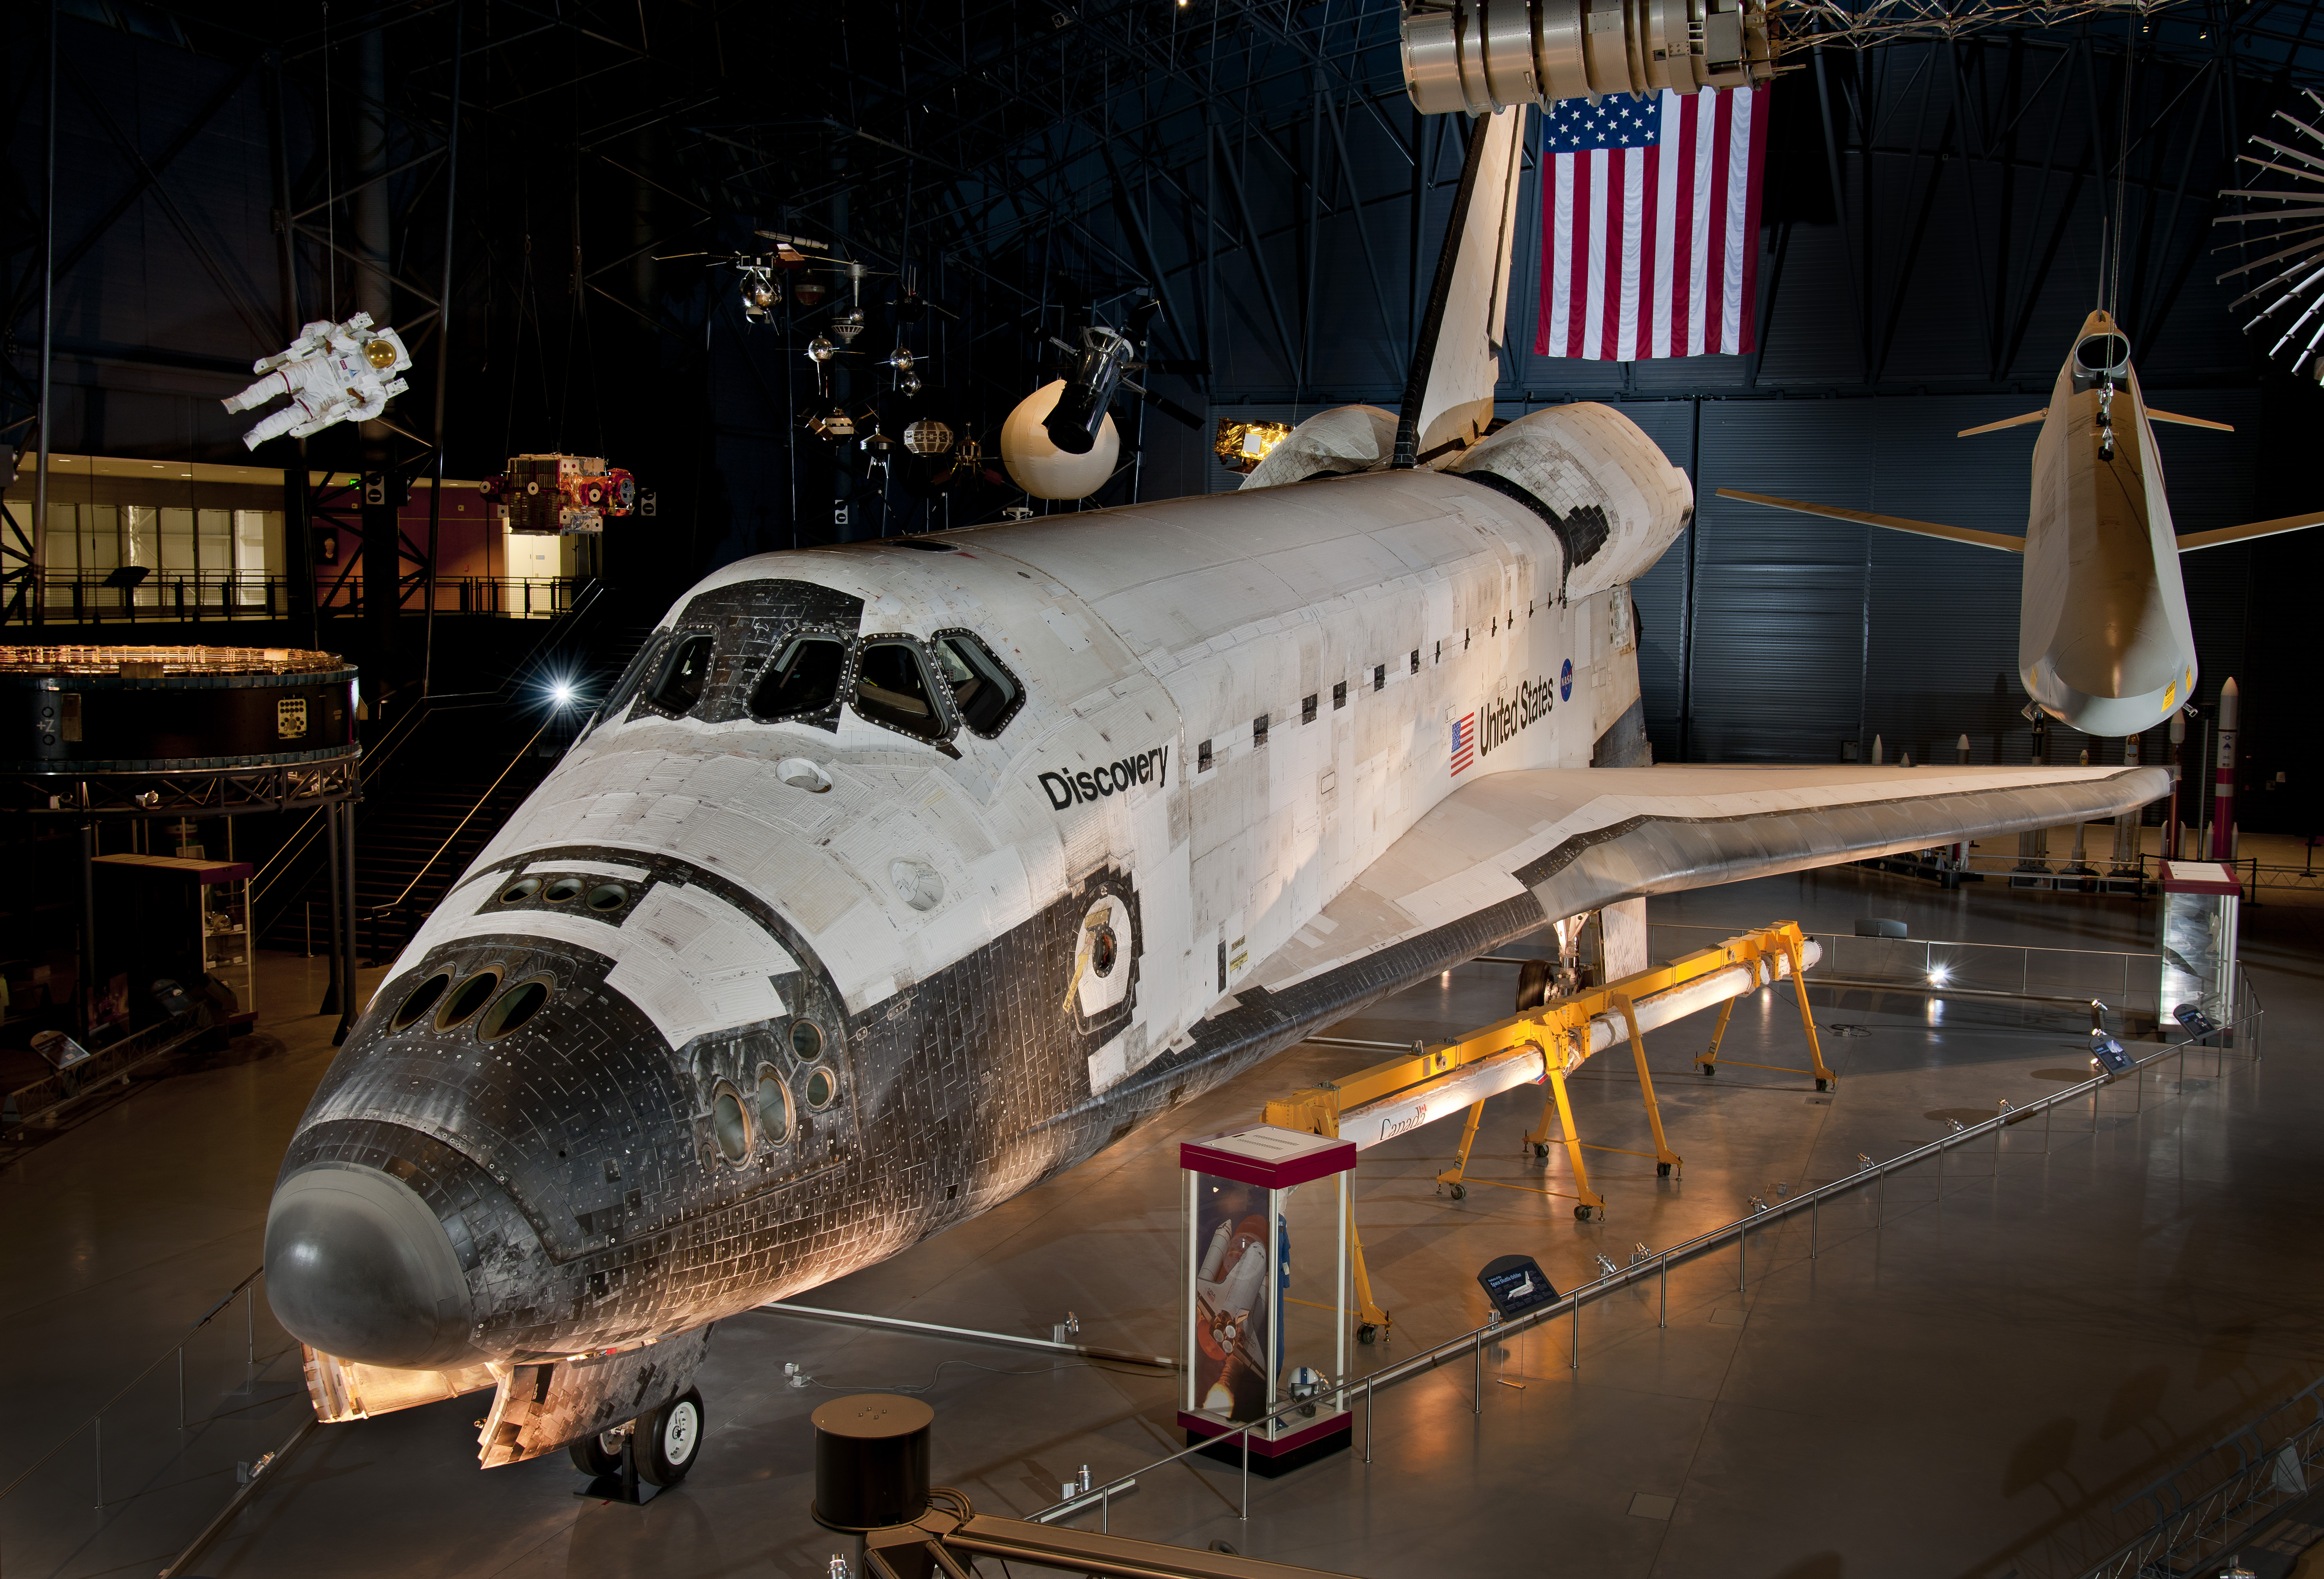 National Air and Space Museum, Smithsonian Institution